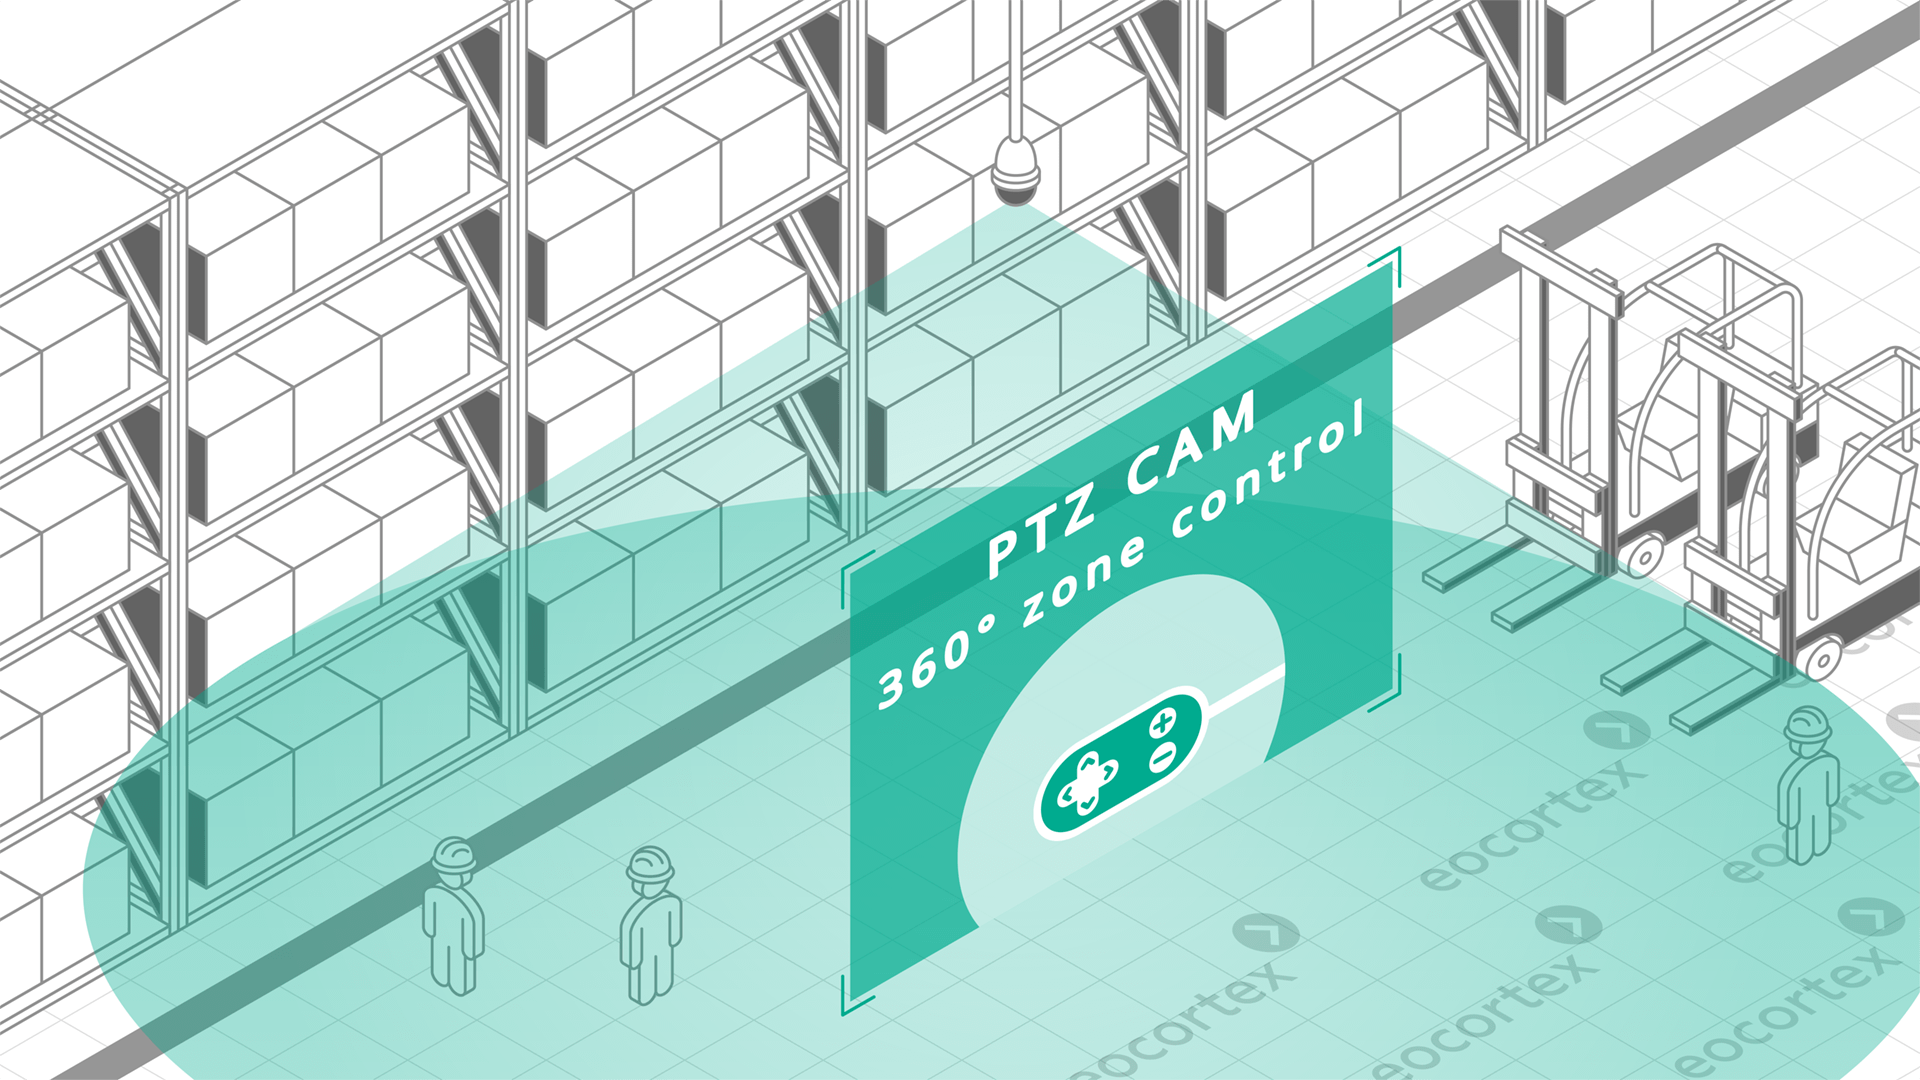 Showcasing of PTZ Camera Control for logistics centers & warehouses. CCTV surveillance system operates on the basis of the Eocortex Video Management Software.